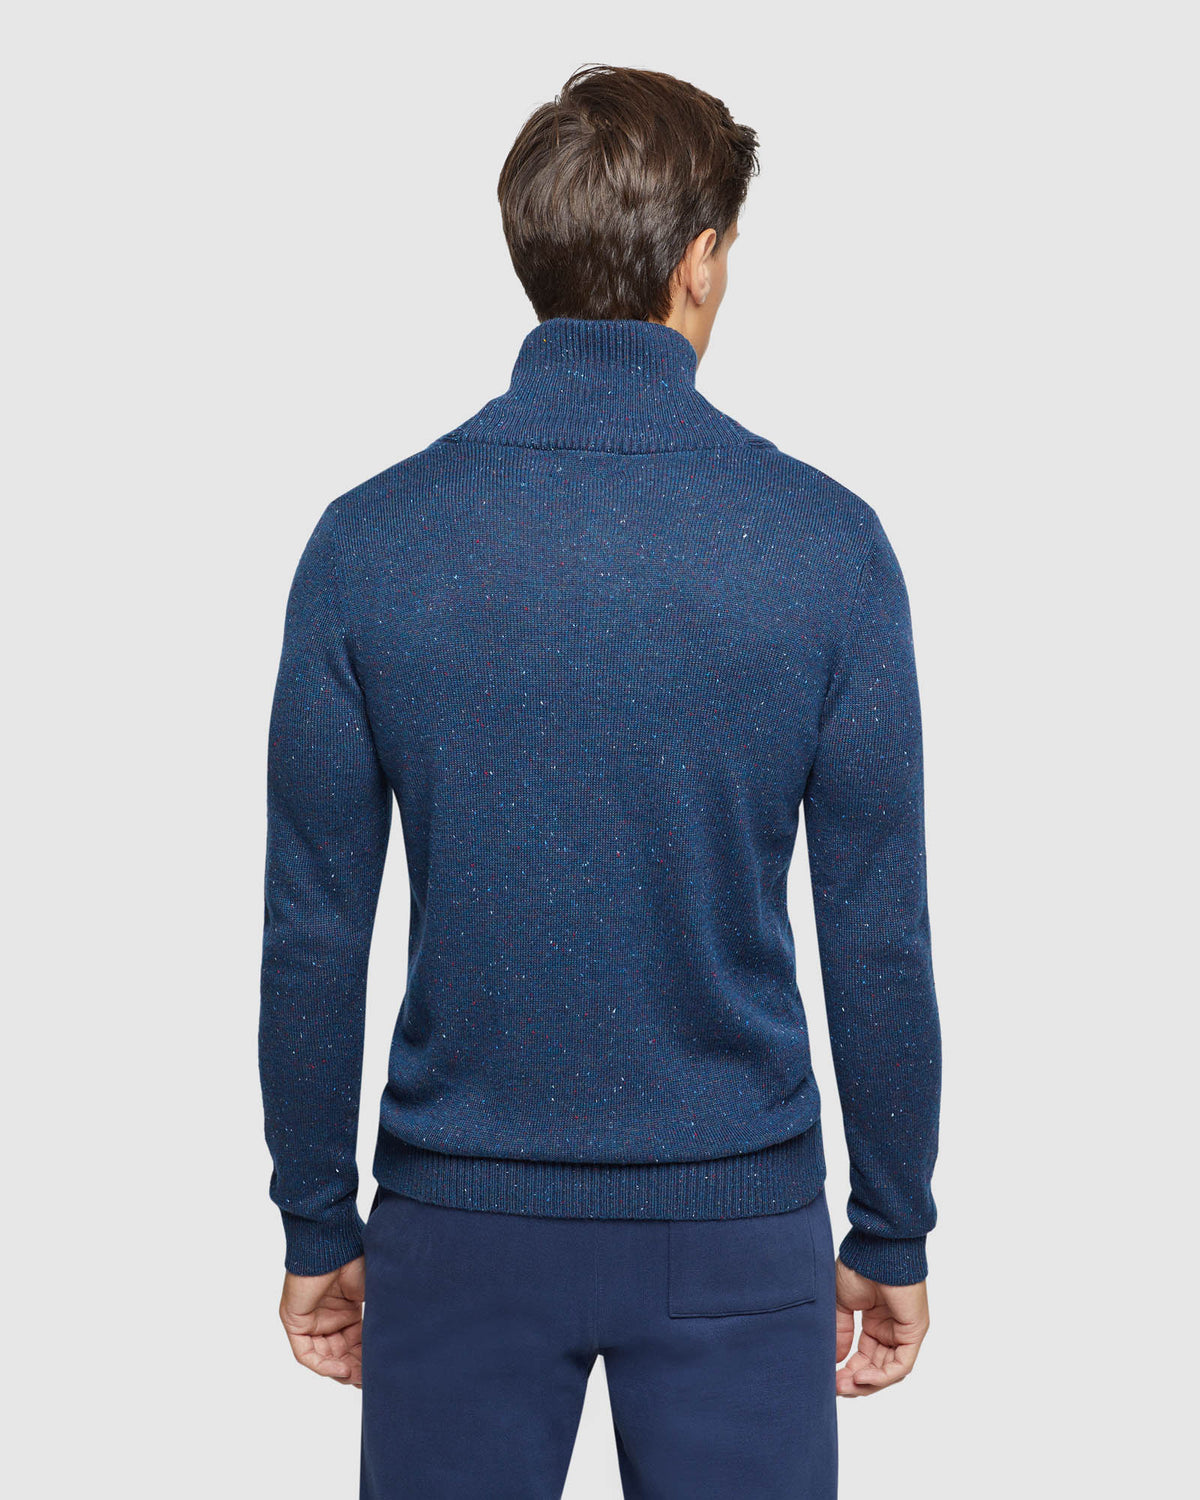 DIGBY DONEGAL SHAWL NECK KNIT MENS KNITWEAR